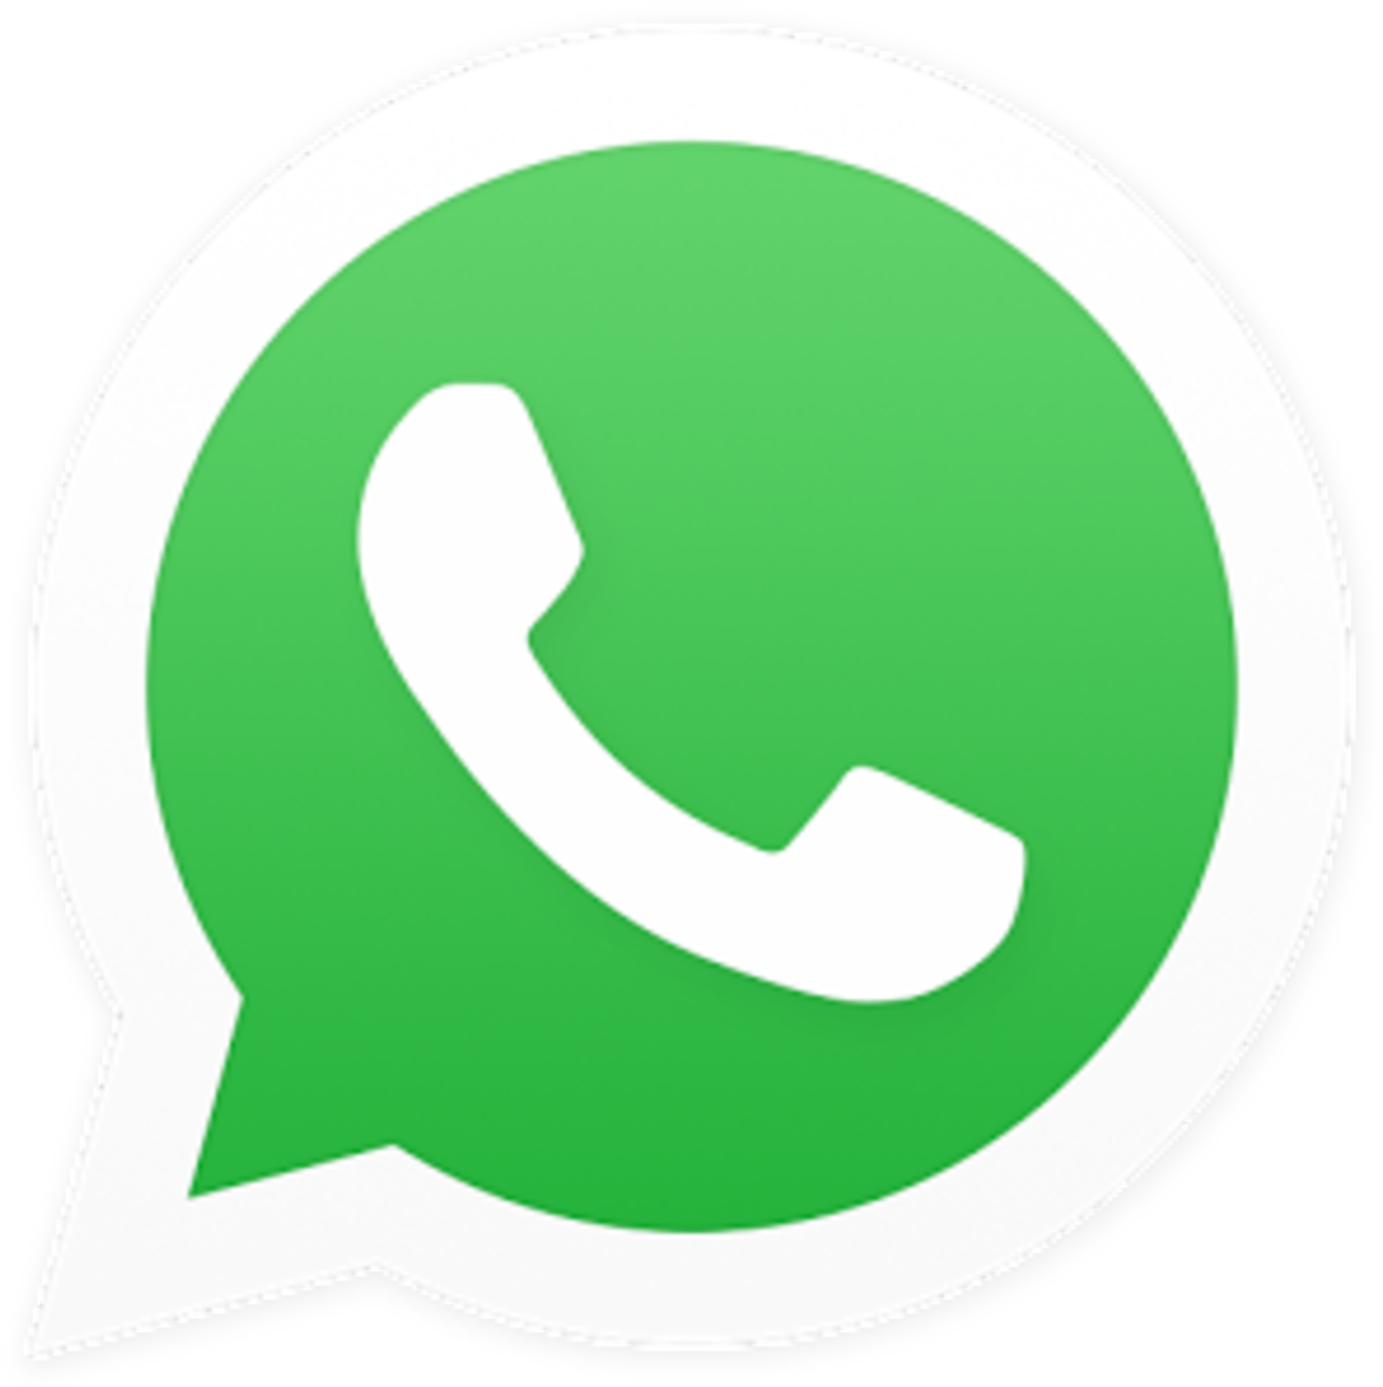 Download Free Png Whatsapp Png Png Whatsapp Logo Small Png Clipart